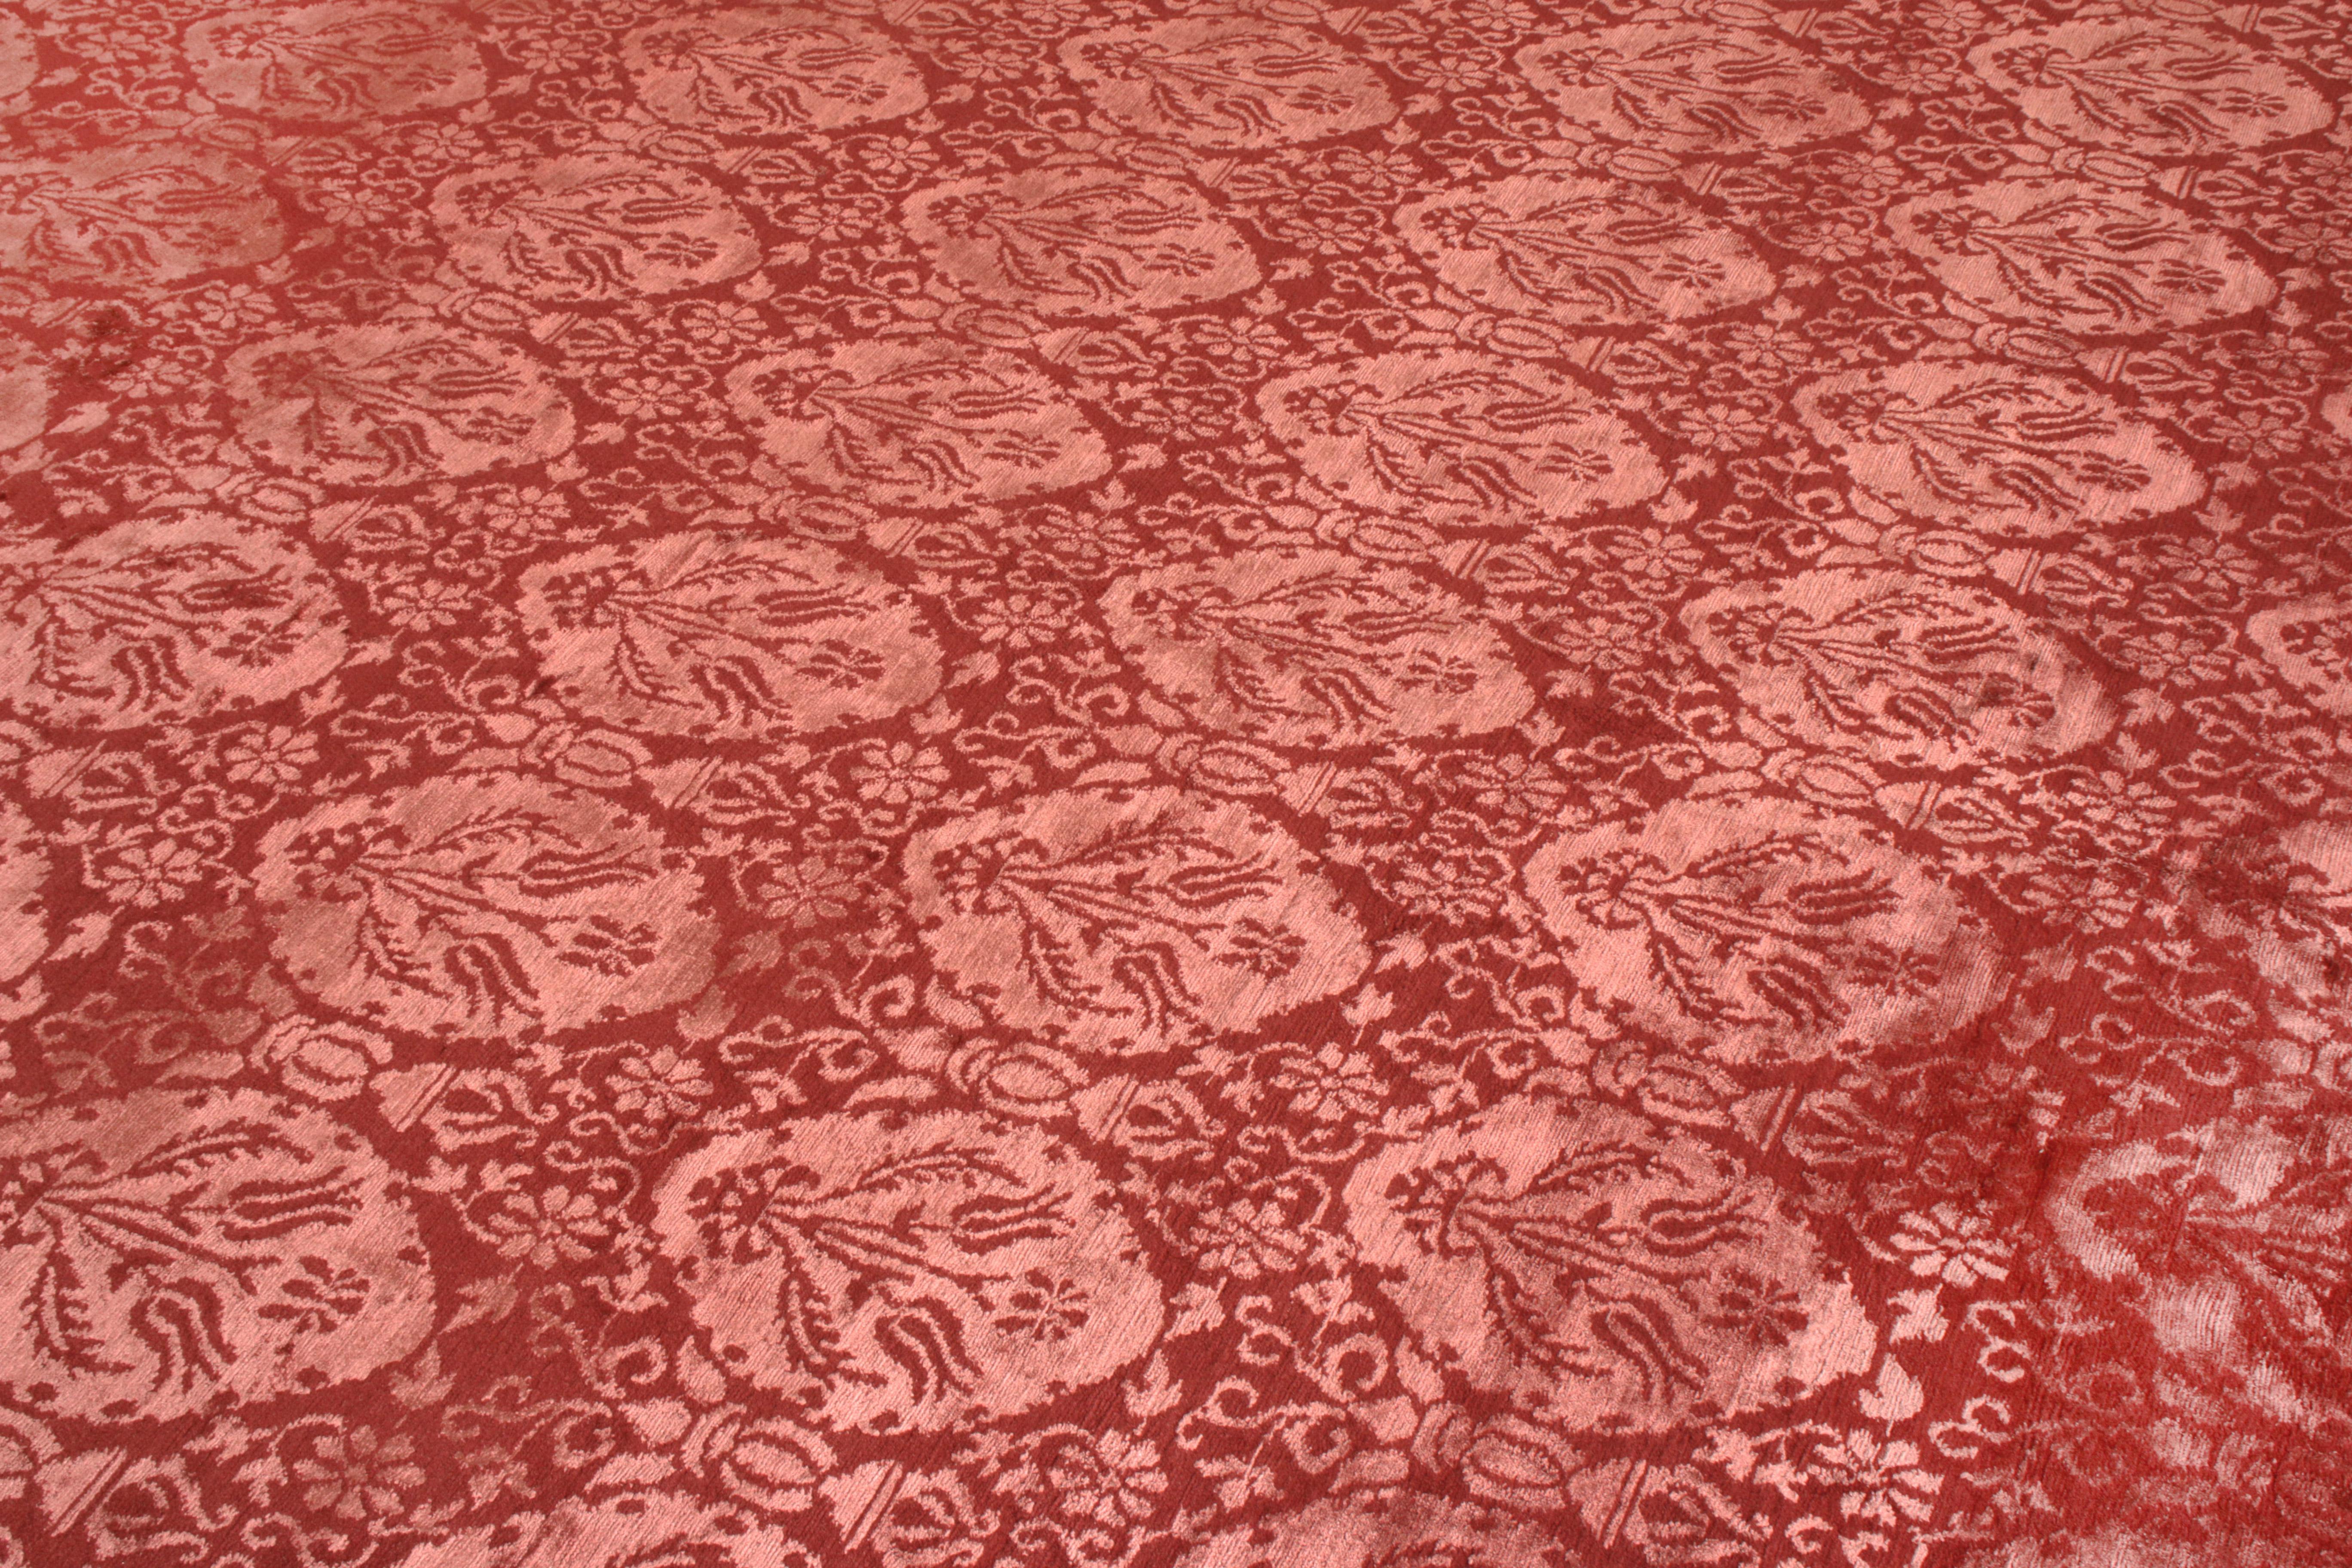 Nepalese Rug & Kilim’s European Style Rug in Red Pink Floral Pattern For Sale